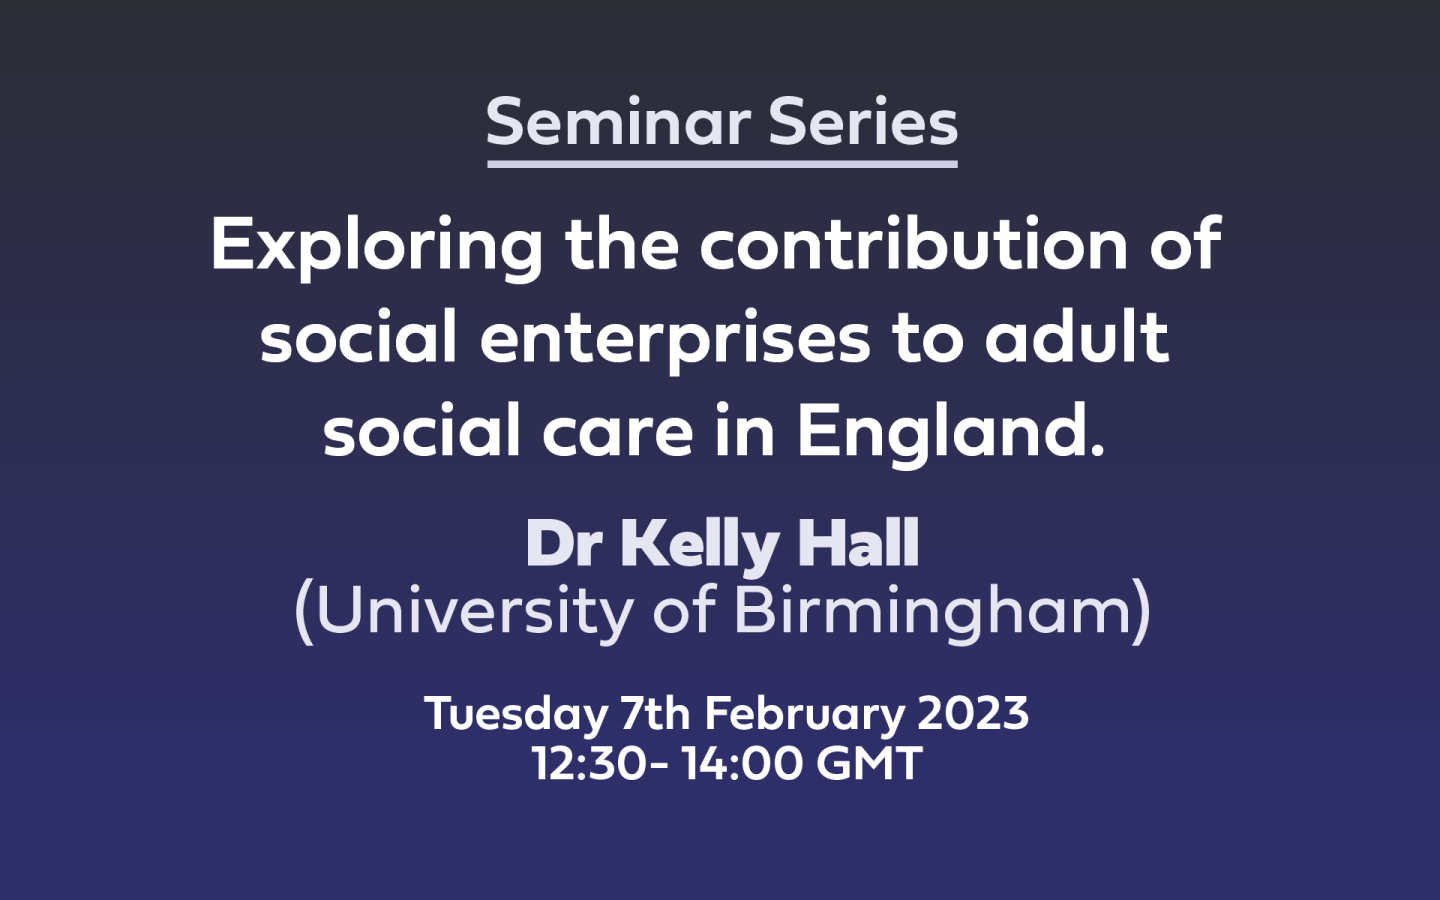 WHite text on blue background: Seminar Series 'Exploring the contribution of social enterprises to adult social care in England.' Dr Kelly Hall (University of Birmingham), Tuesday 7th February 2023 12:30- 14:00 GMT